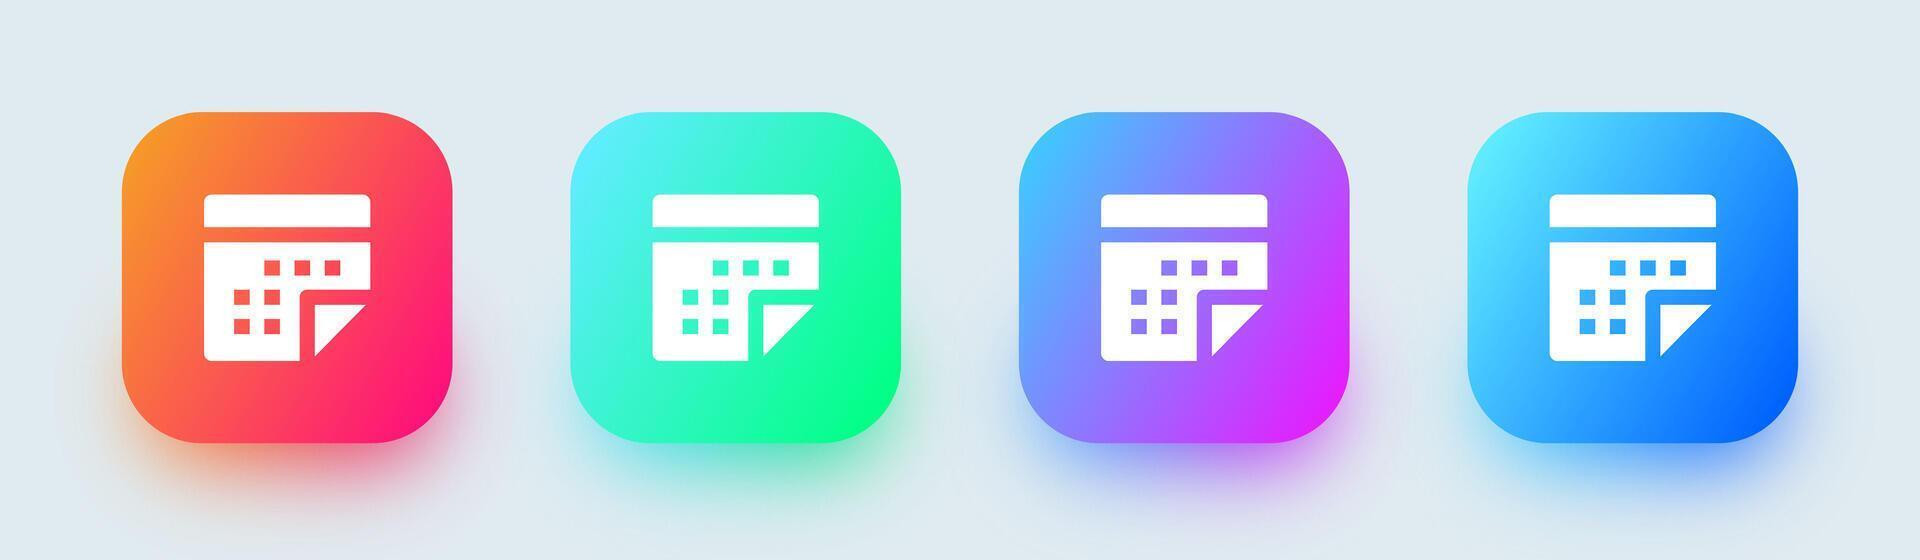 Calendar solid icon in square gradient colors. Event signs vector illustration.